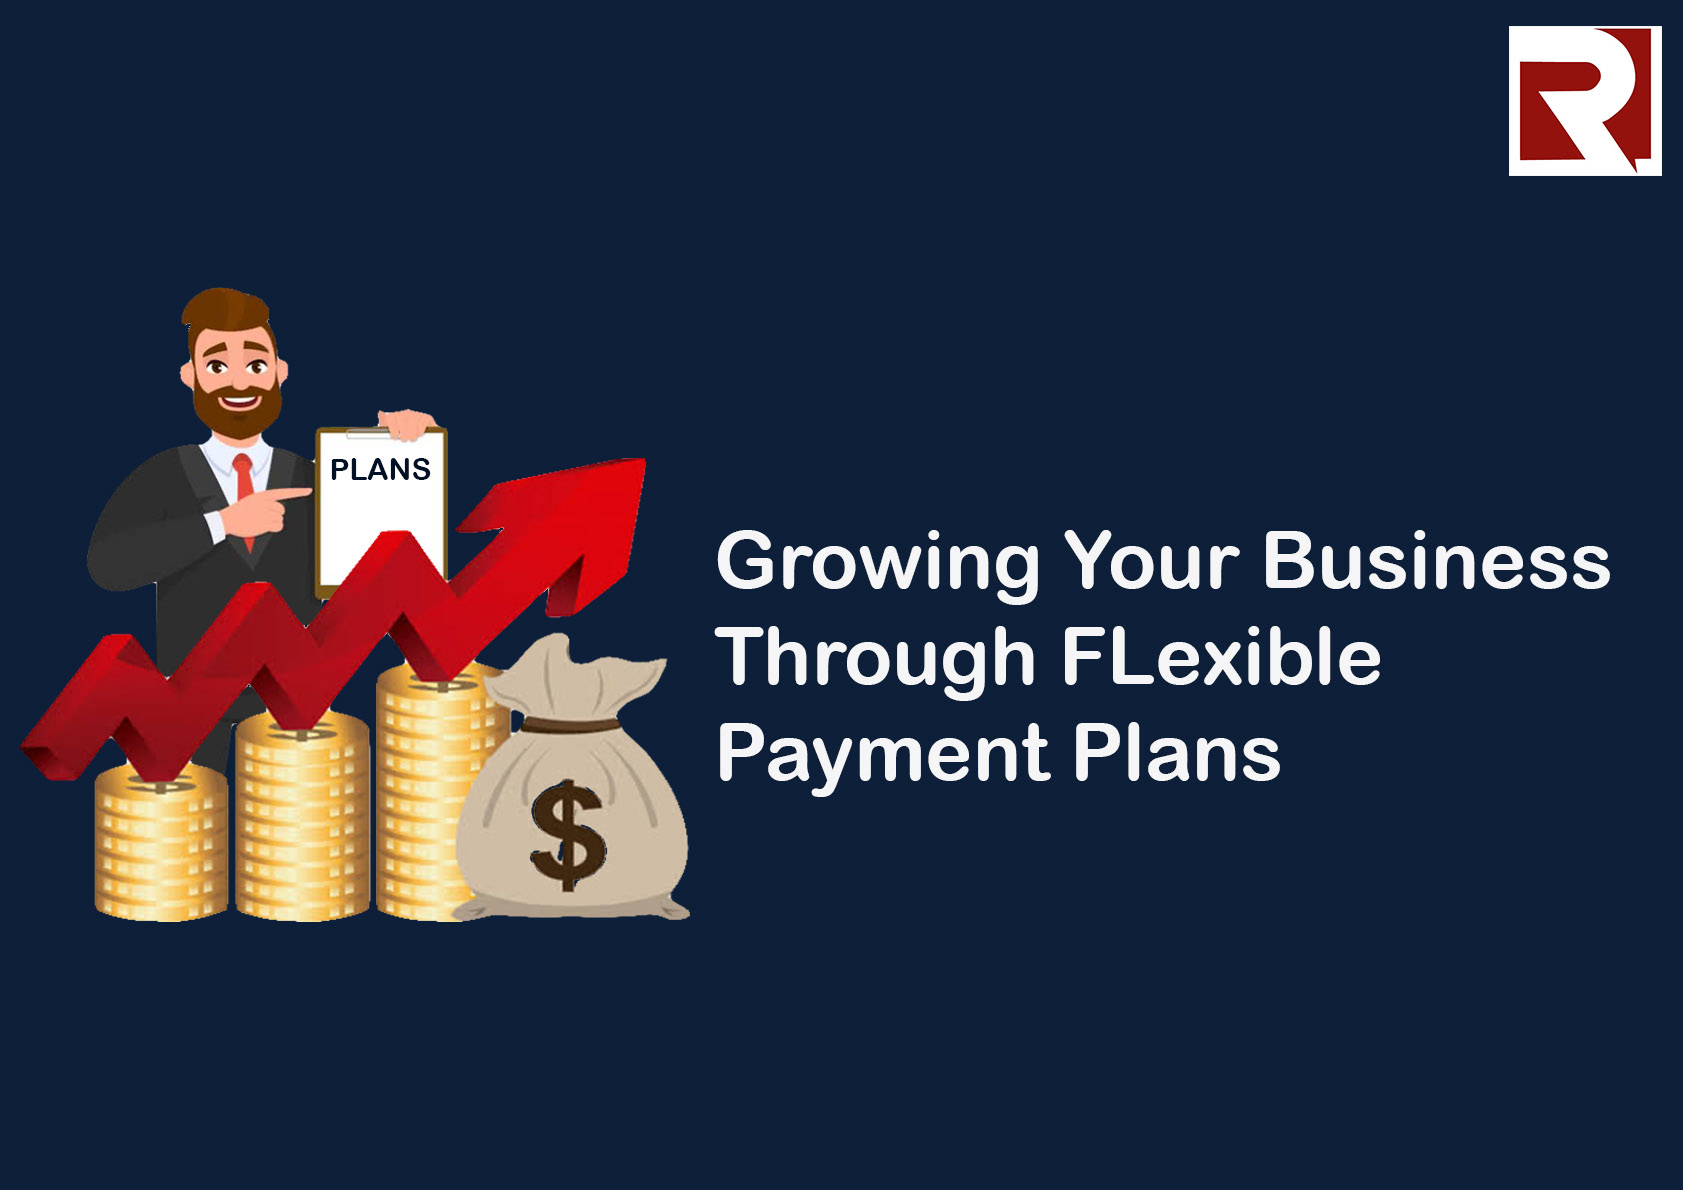 Growing Your Business Through Flexible Payment Plans